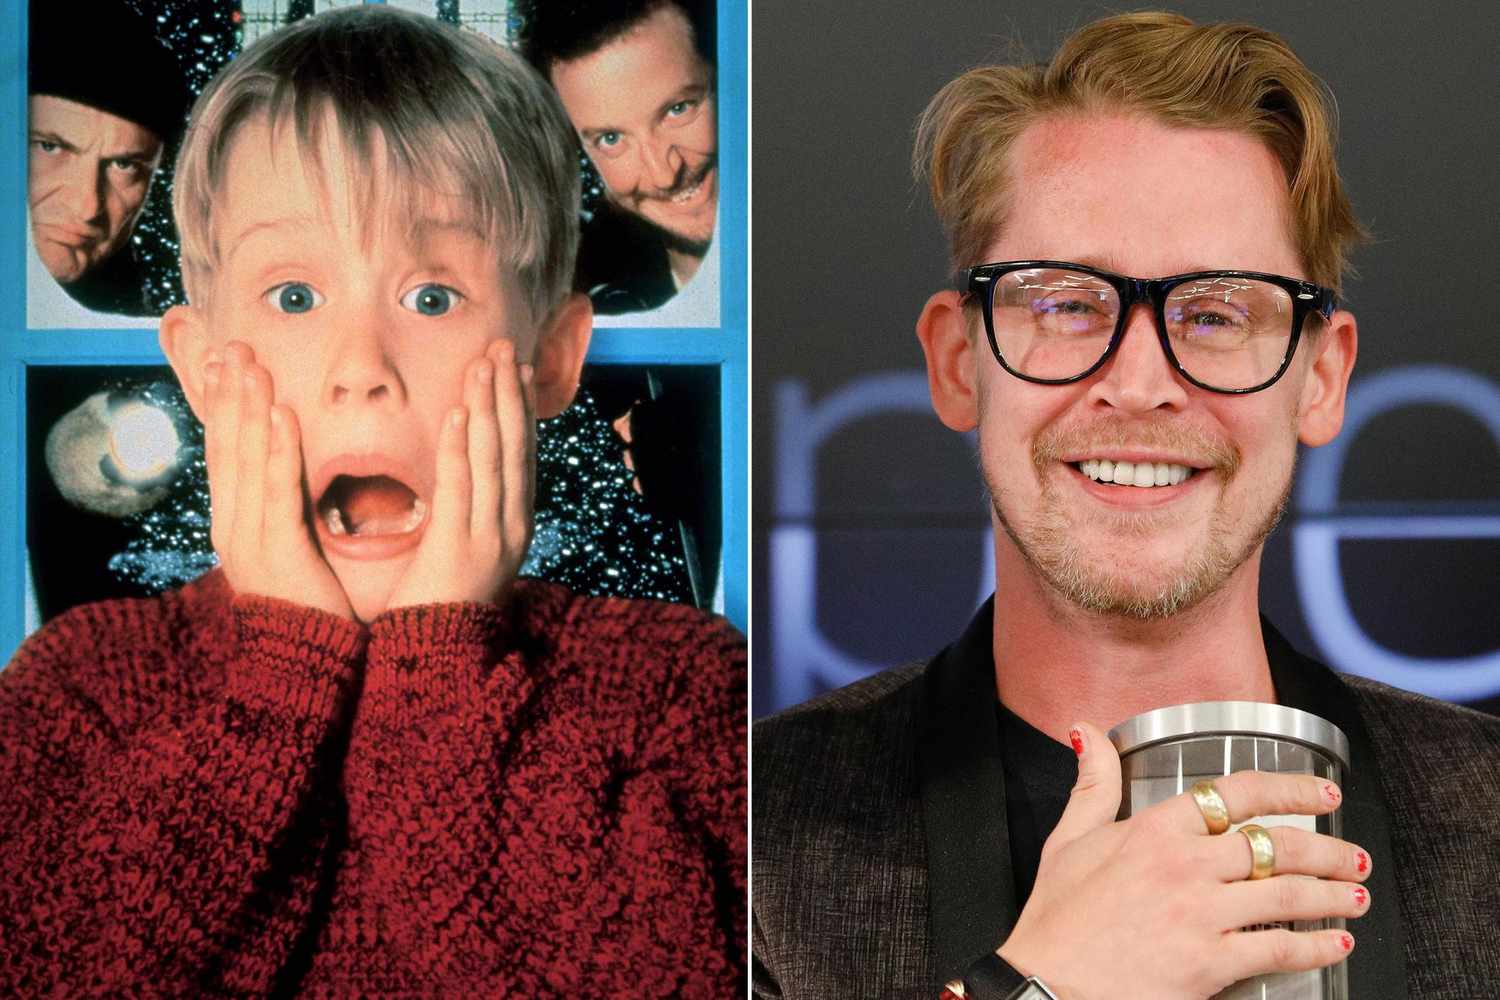 How the Cast of “Home Alone” Looks After 30 Years